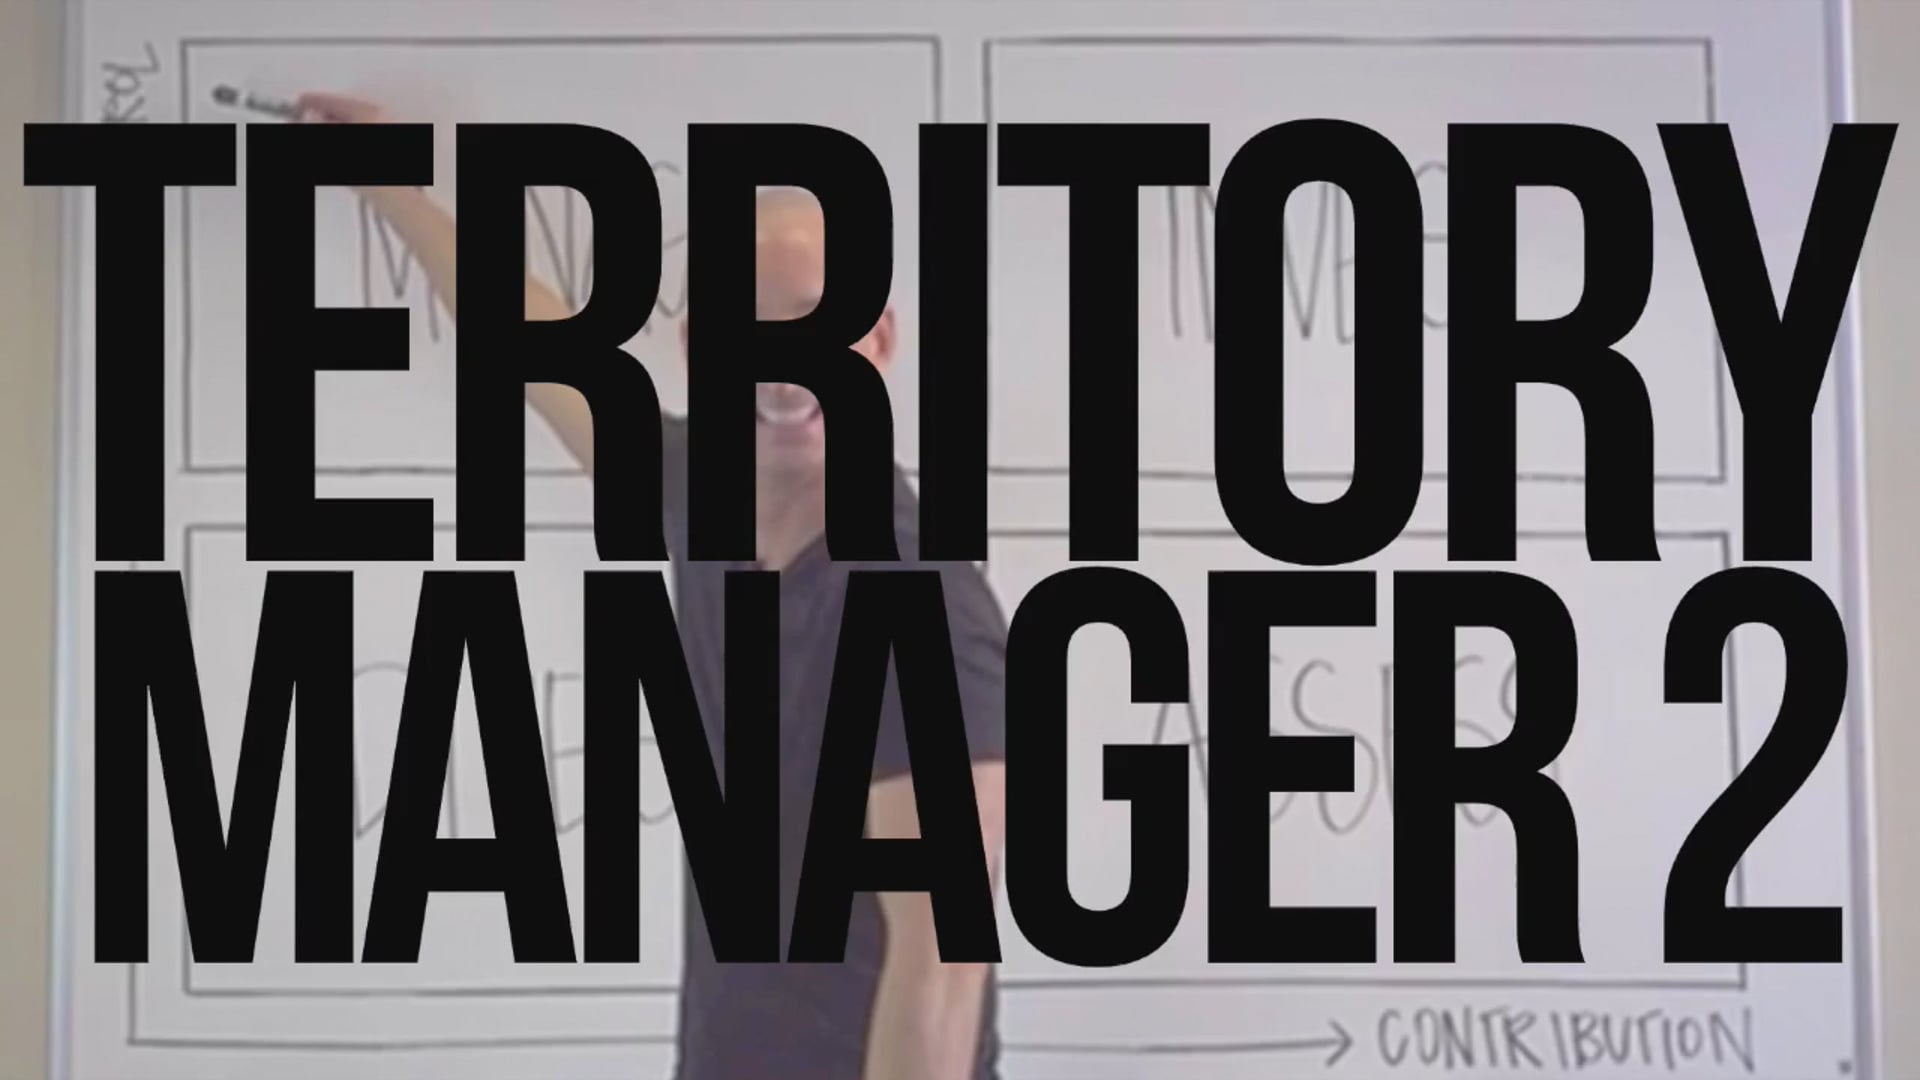 Territory Manager 2